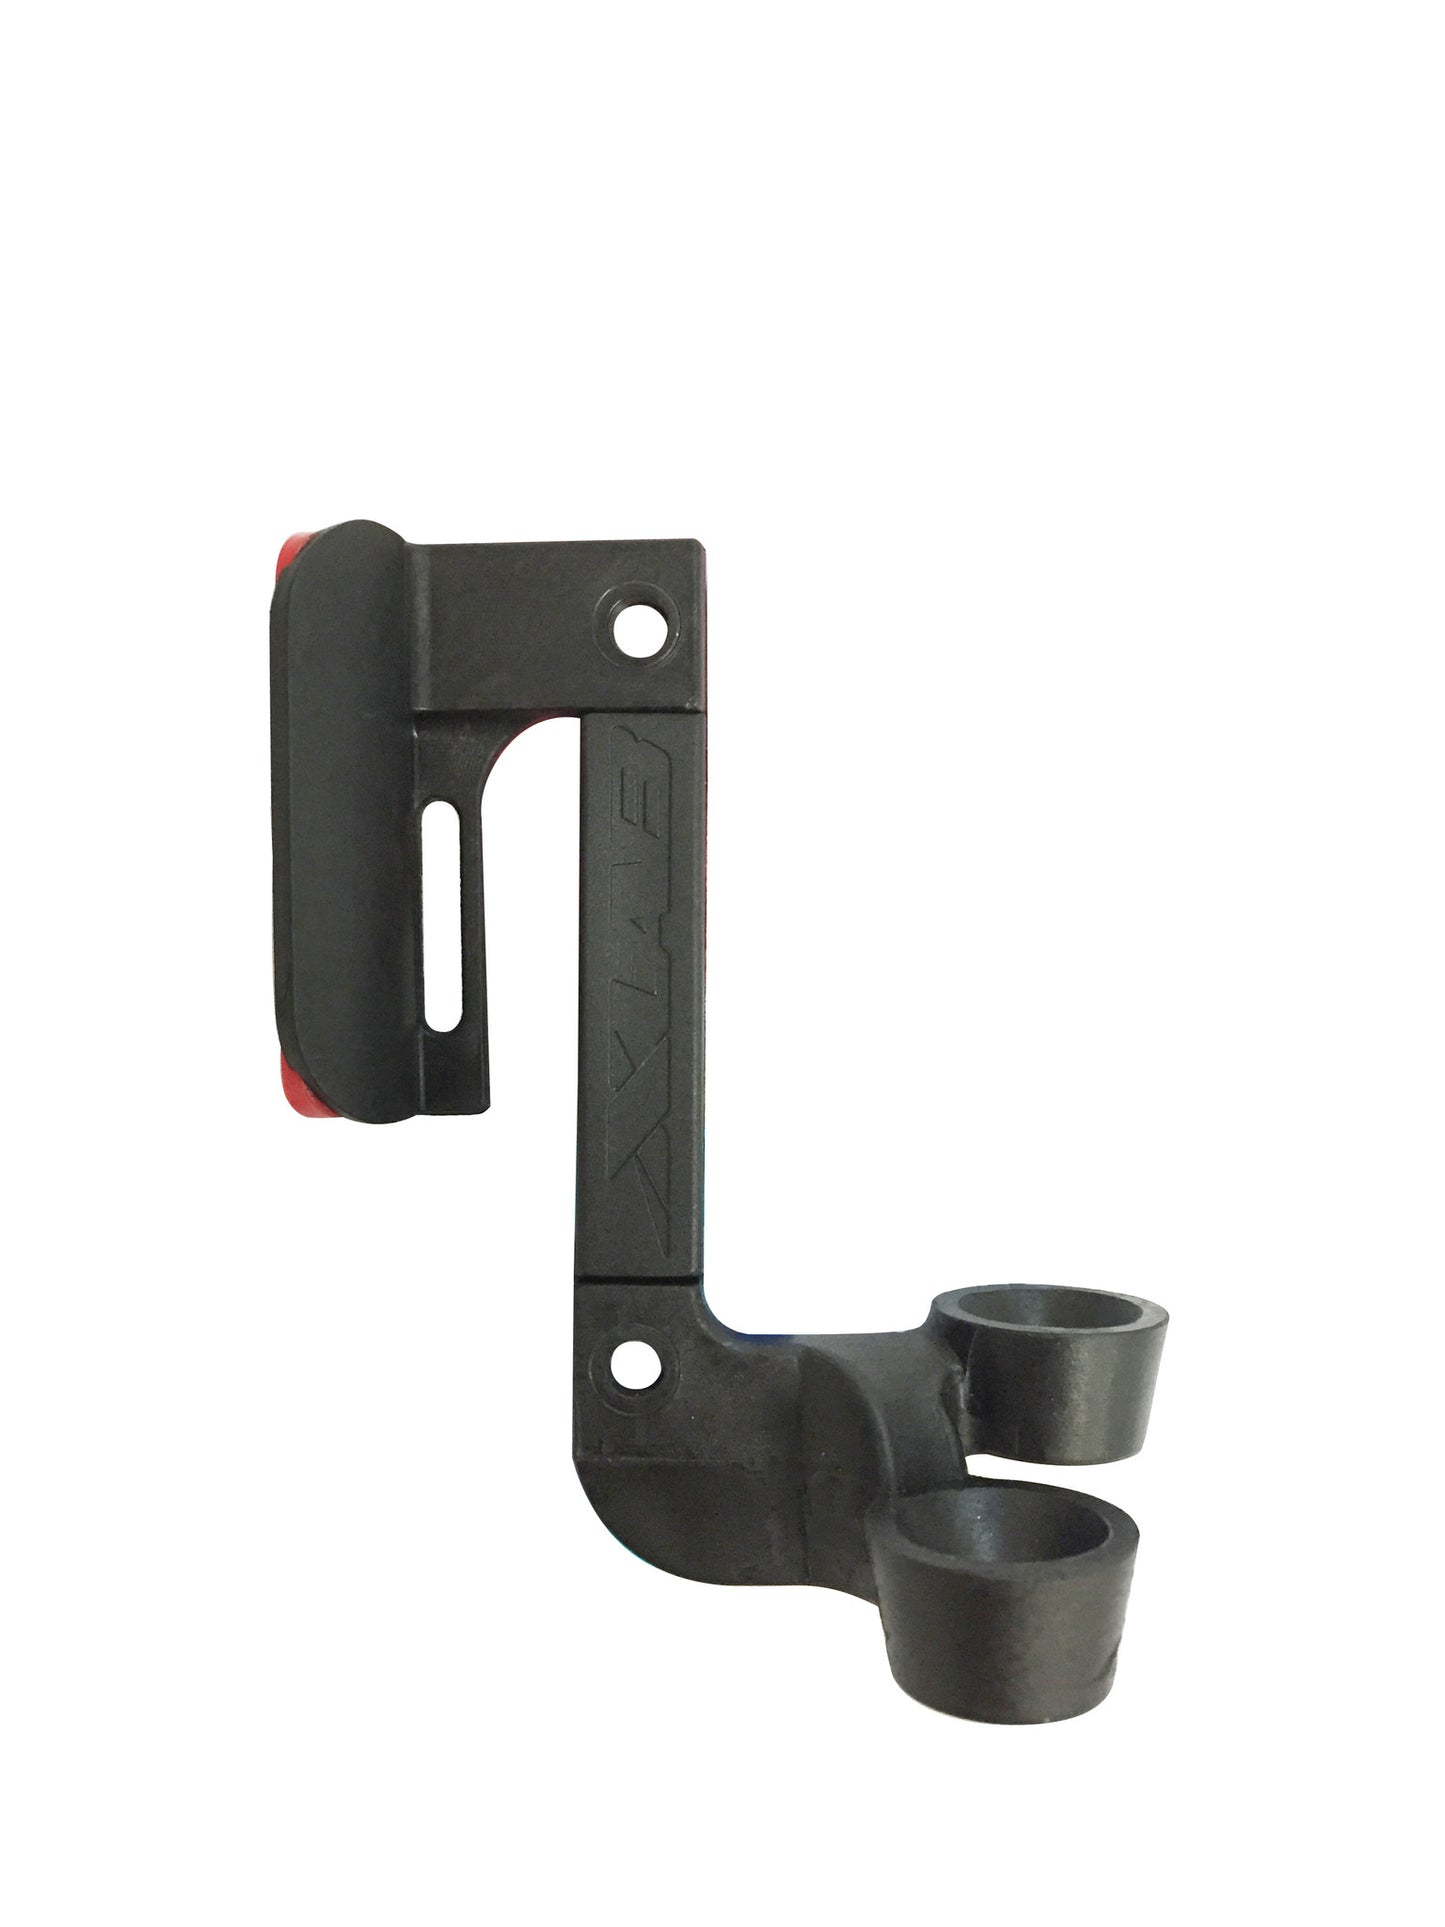 XLAB Multi-Strike Repair Holder without CO2 (2291)